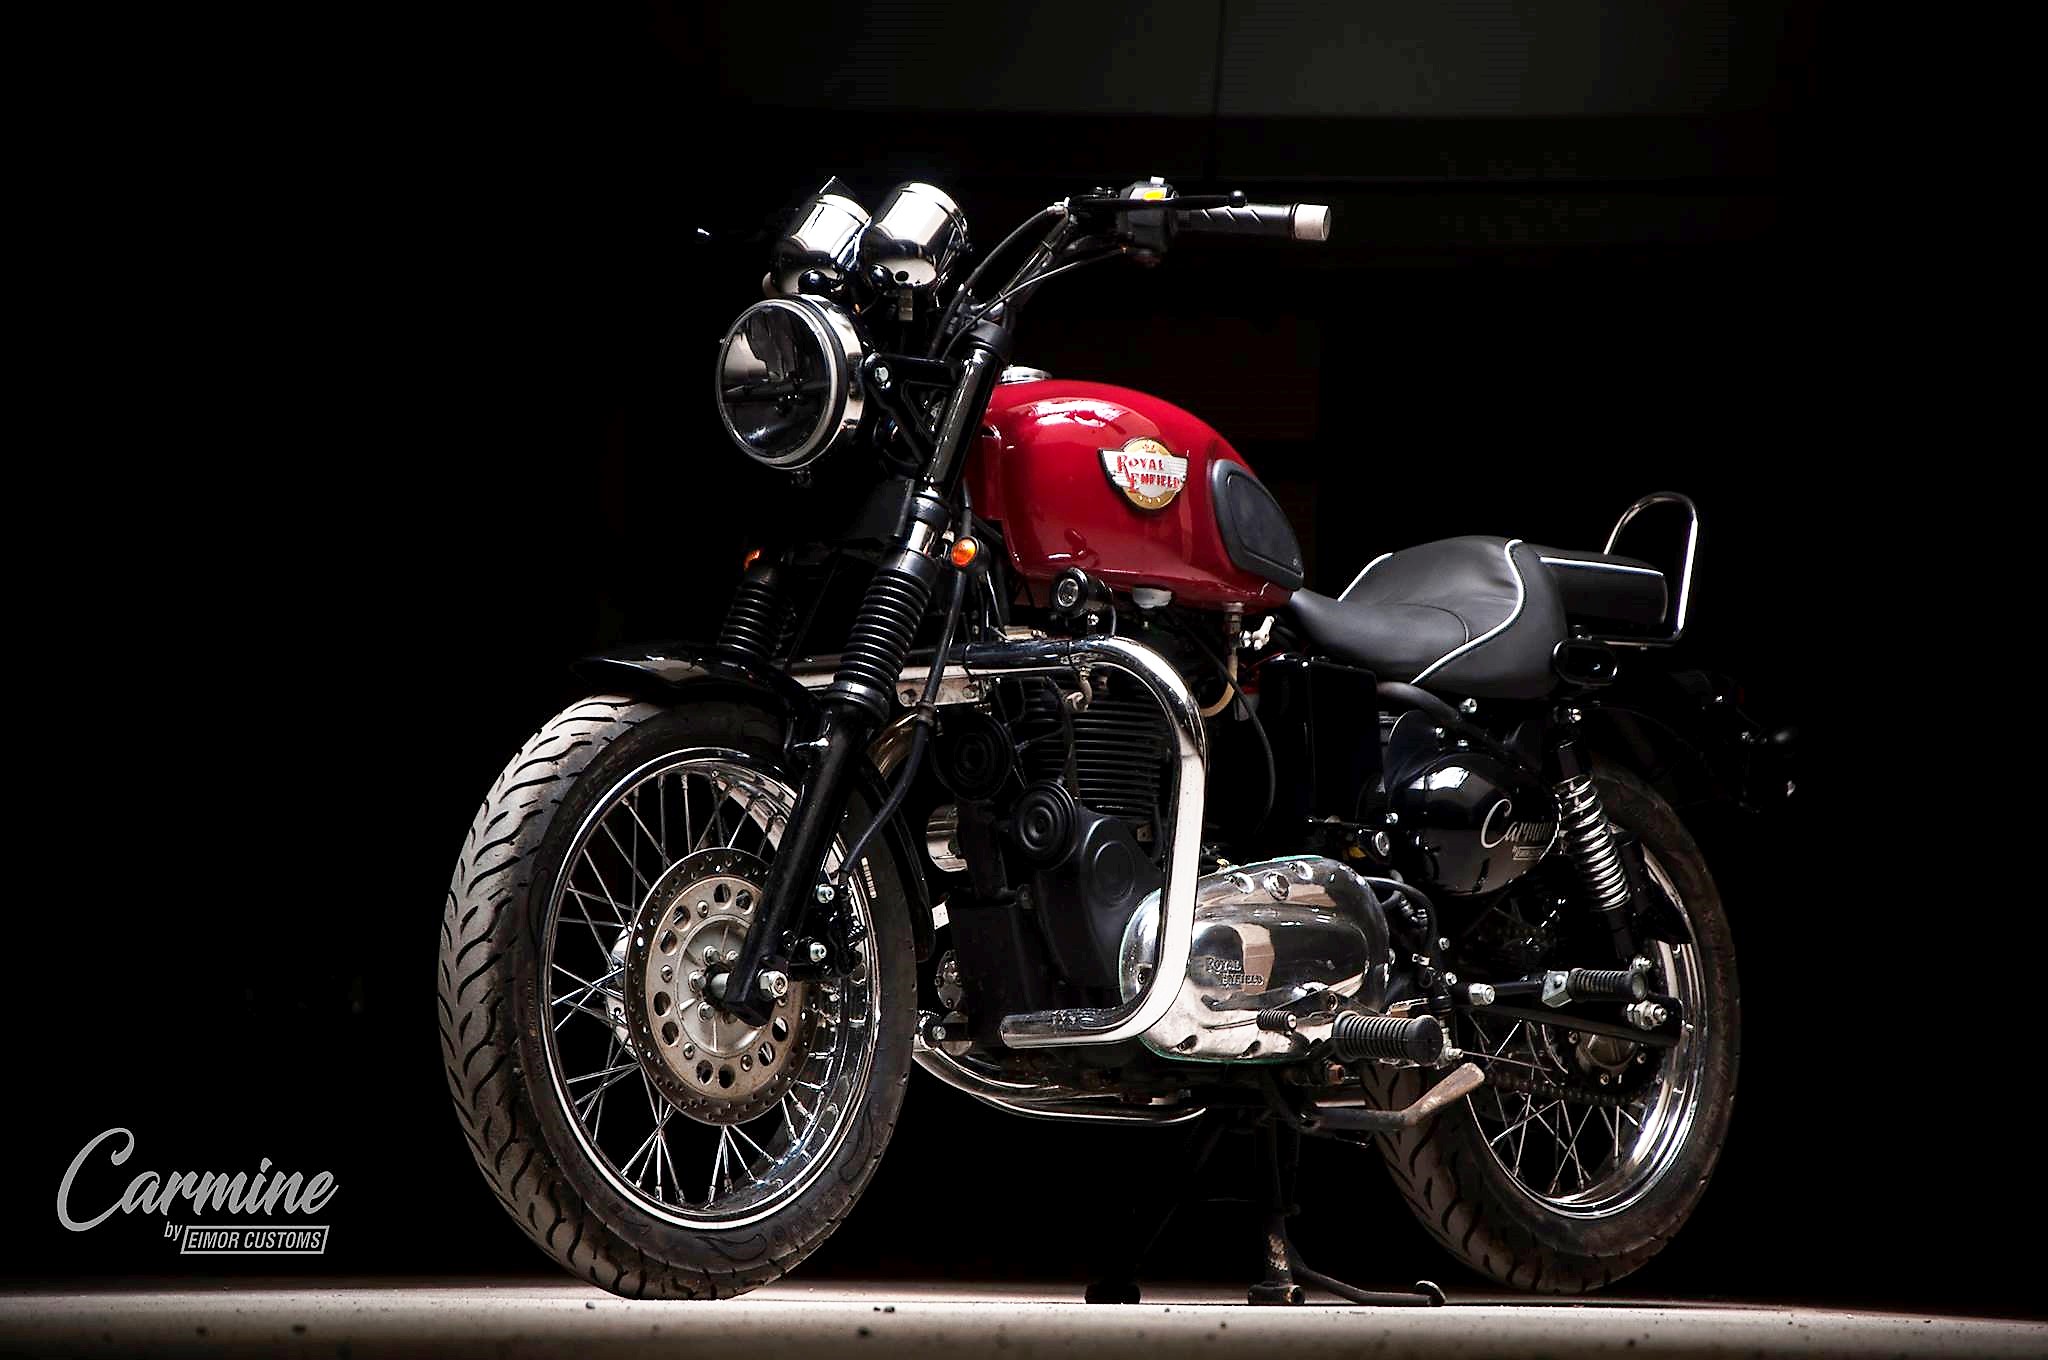 Meet Royal Enfield Carmine 350 Equipped with Premium Parts - background